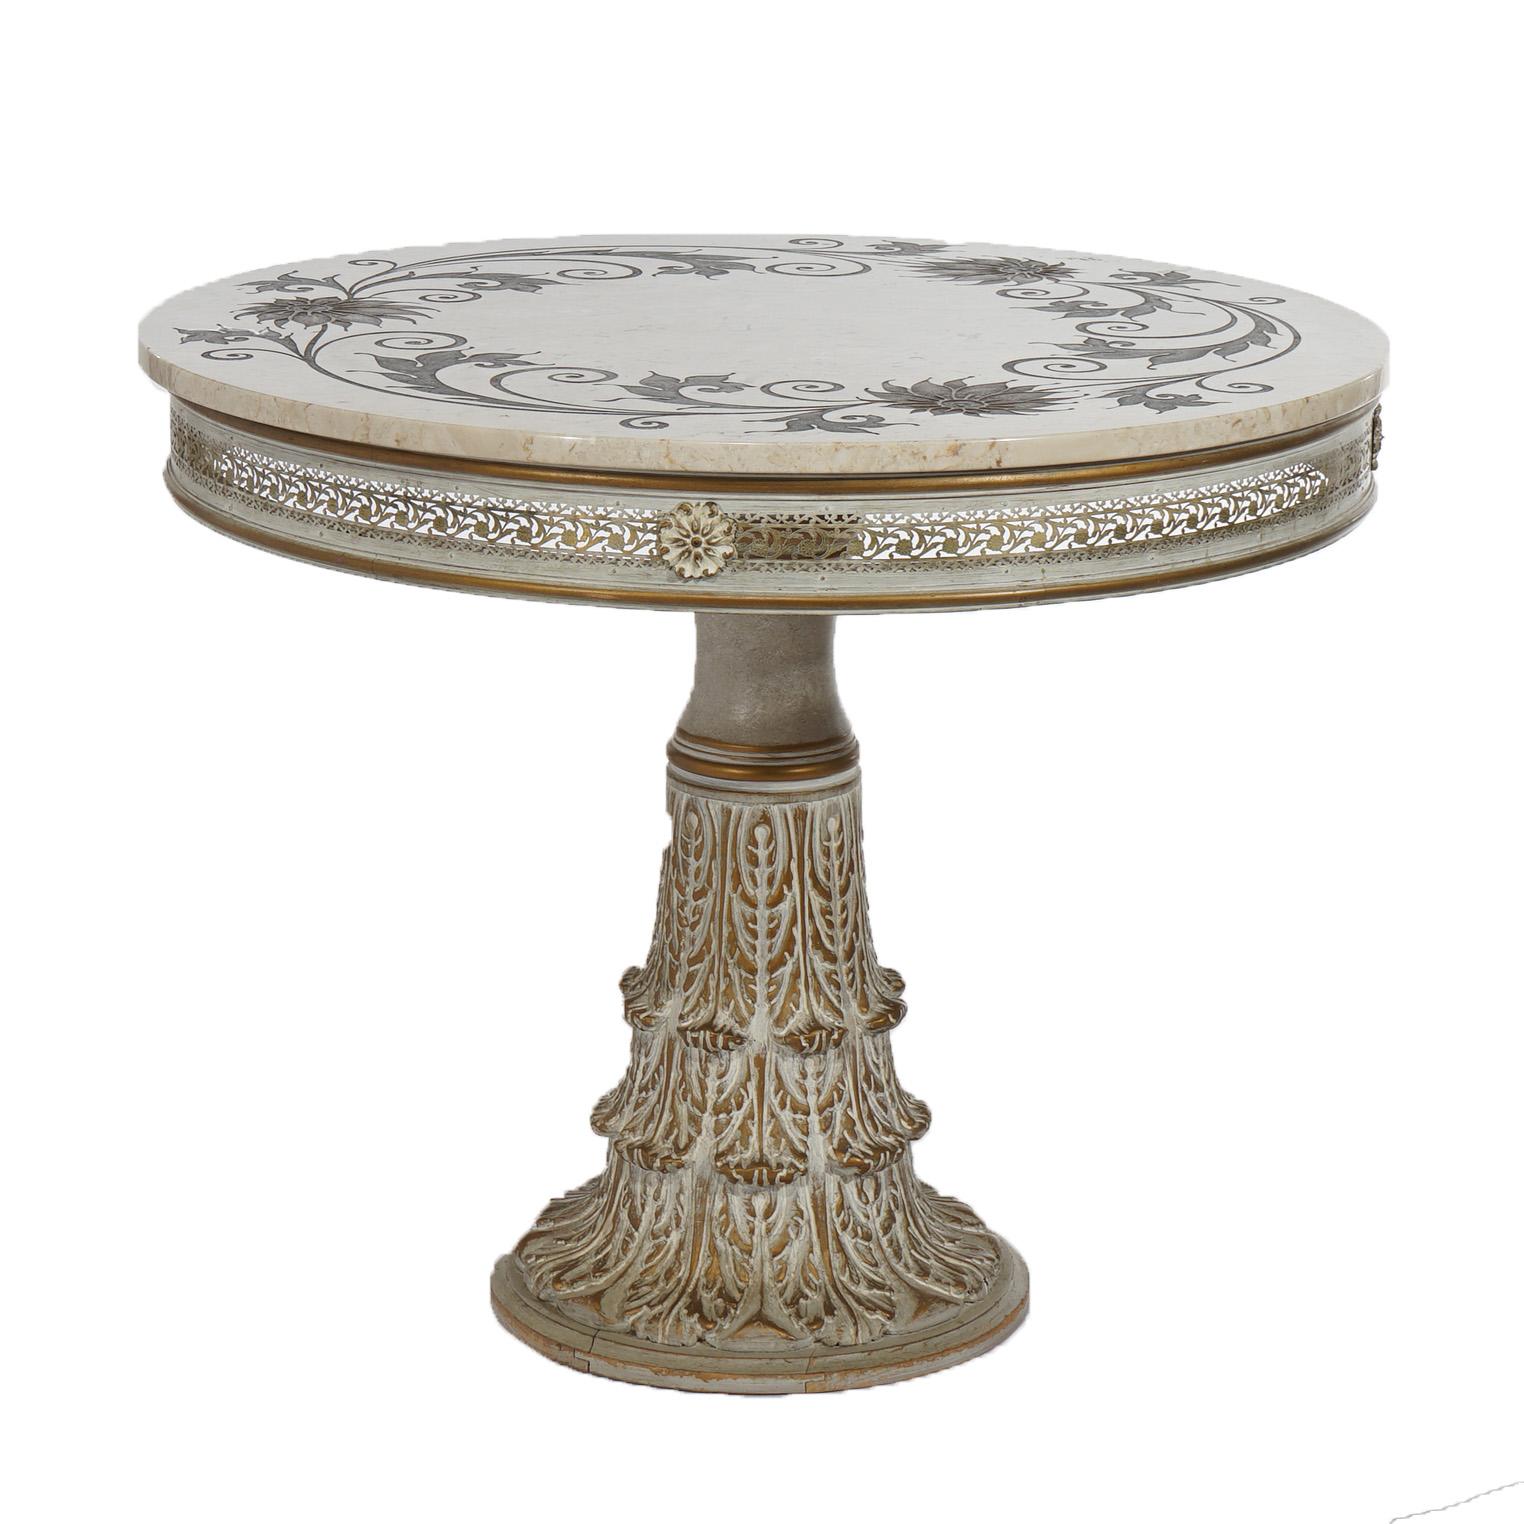 Italian Carved Wood & Foliate Inlaid Marble Center Table, 20th C 5